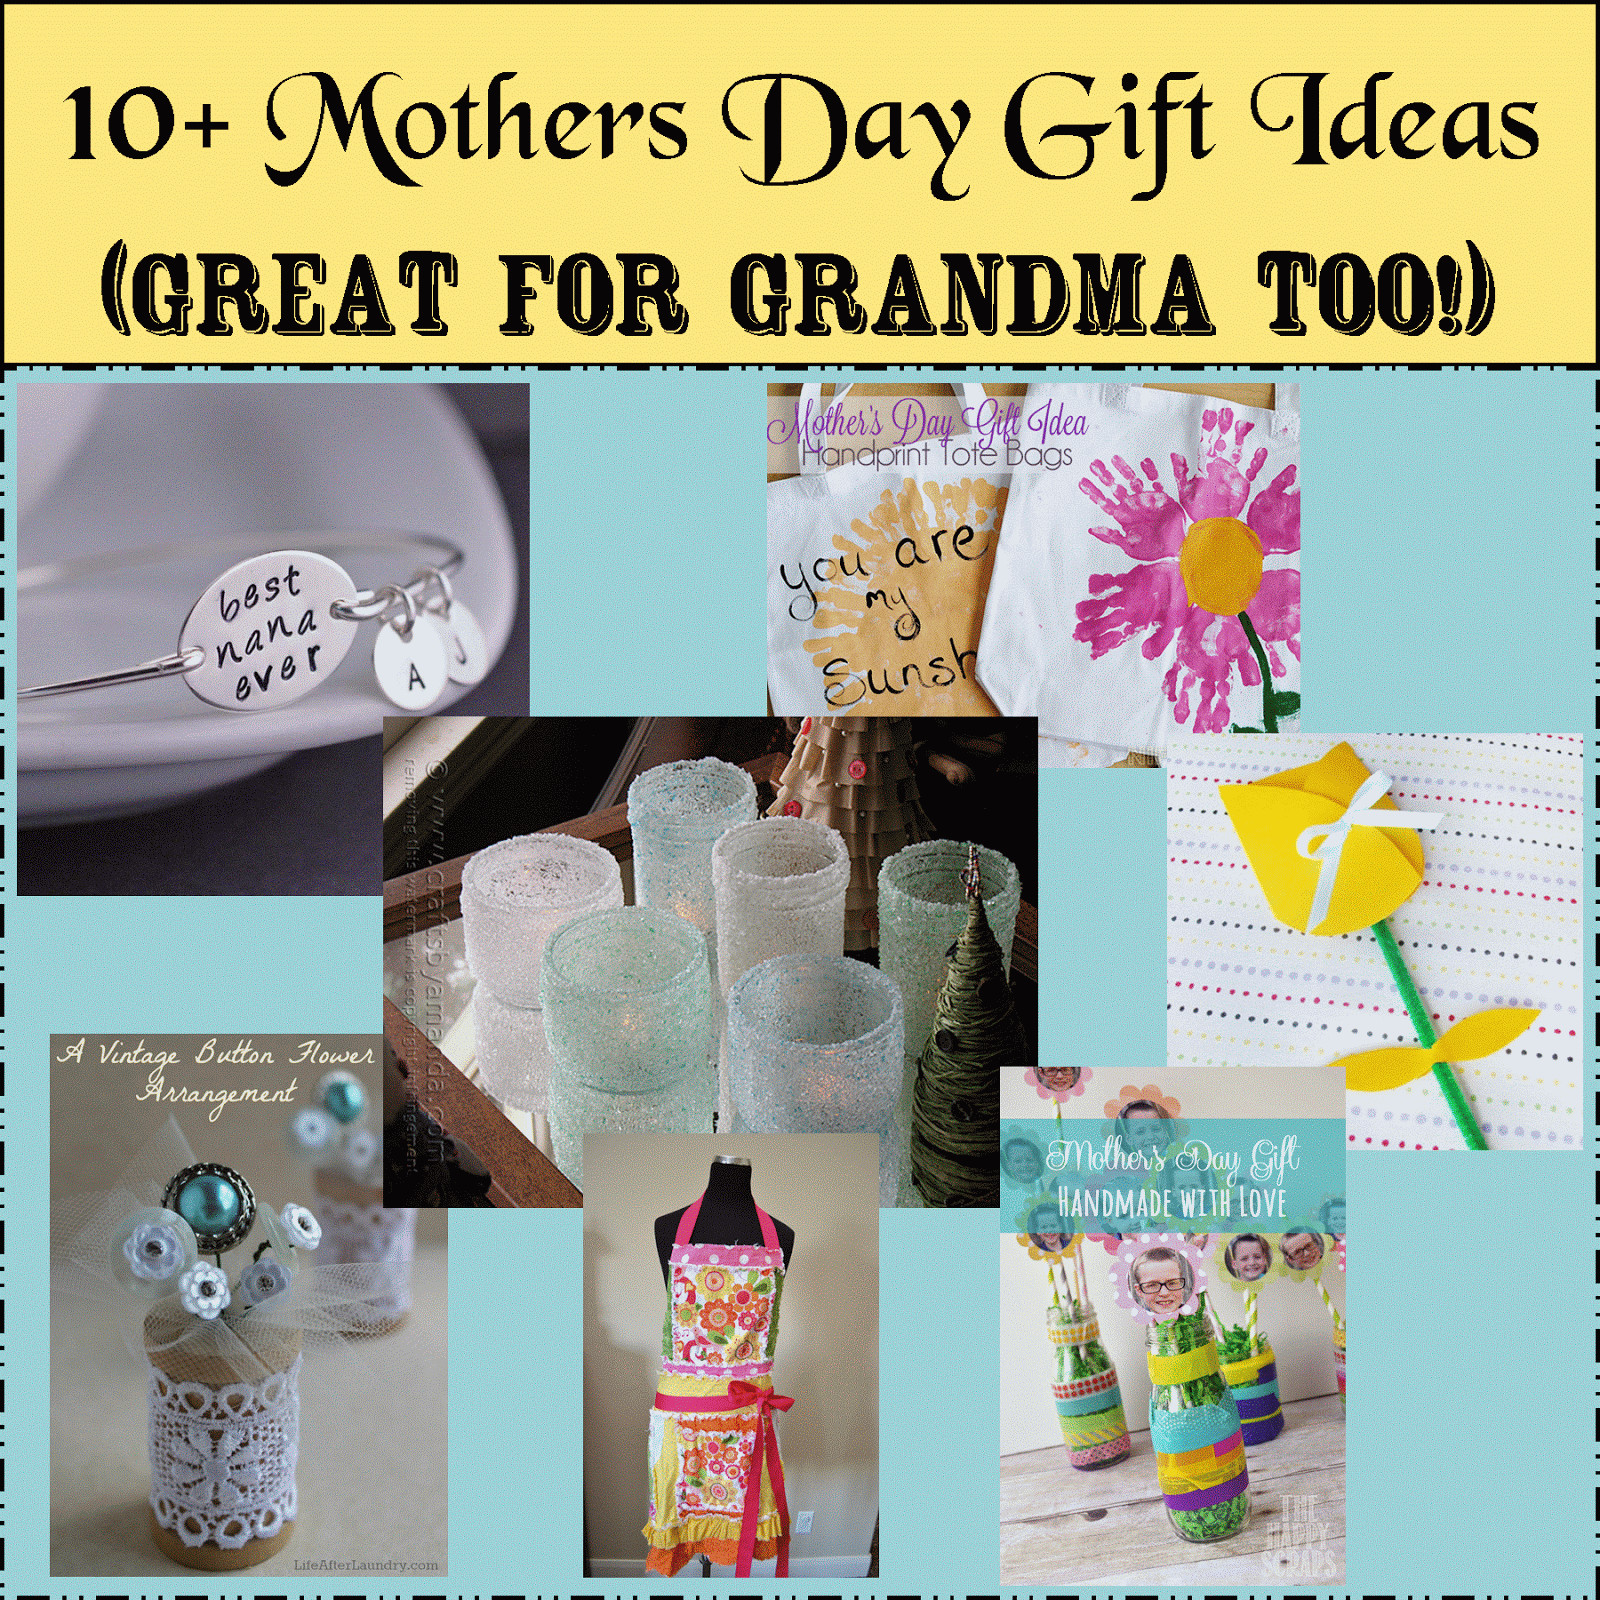 Mother's Day Gift Ideas For Grandmother
 Mother Day Gifts Roundup Perfect for Grandma Too